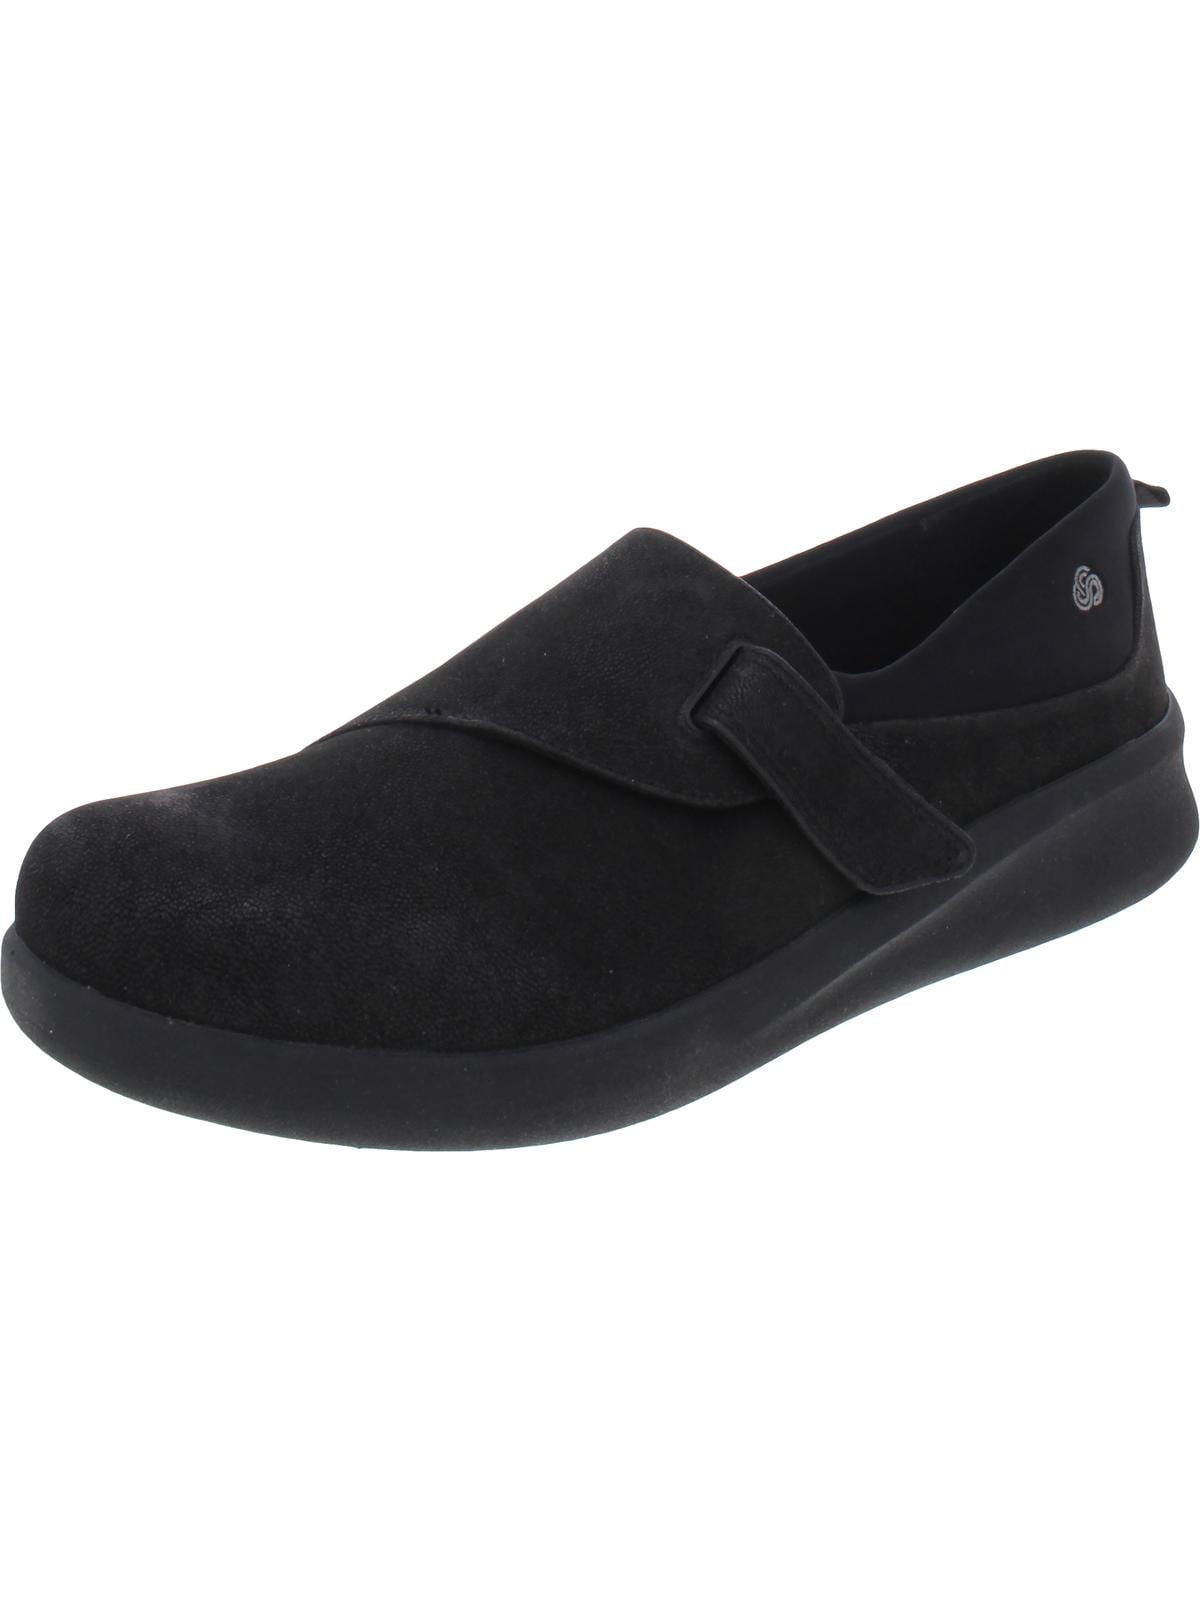 Clarks - Cloudsteppers by Clarks Womens Sillian 2.0 Ease Loafers Black ...